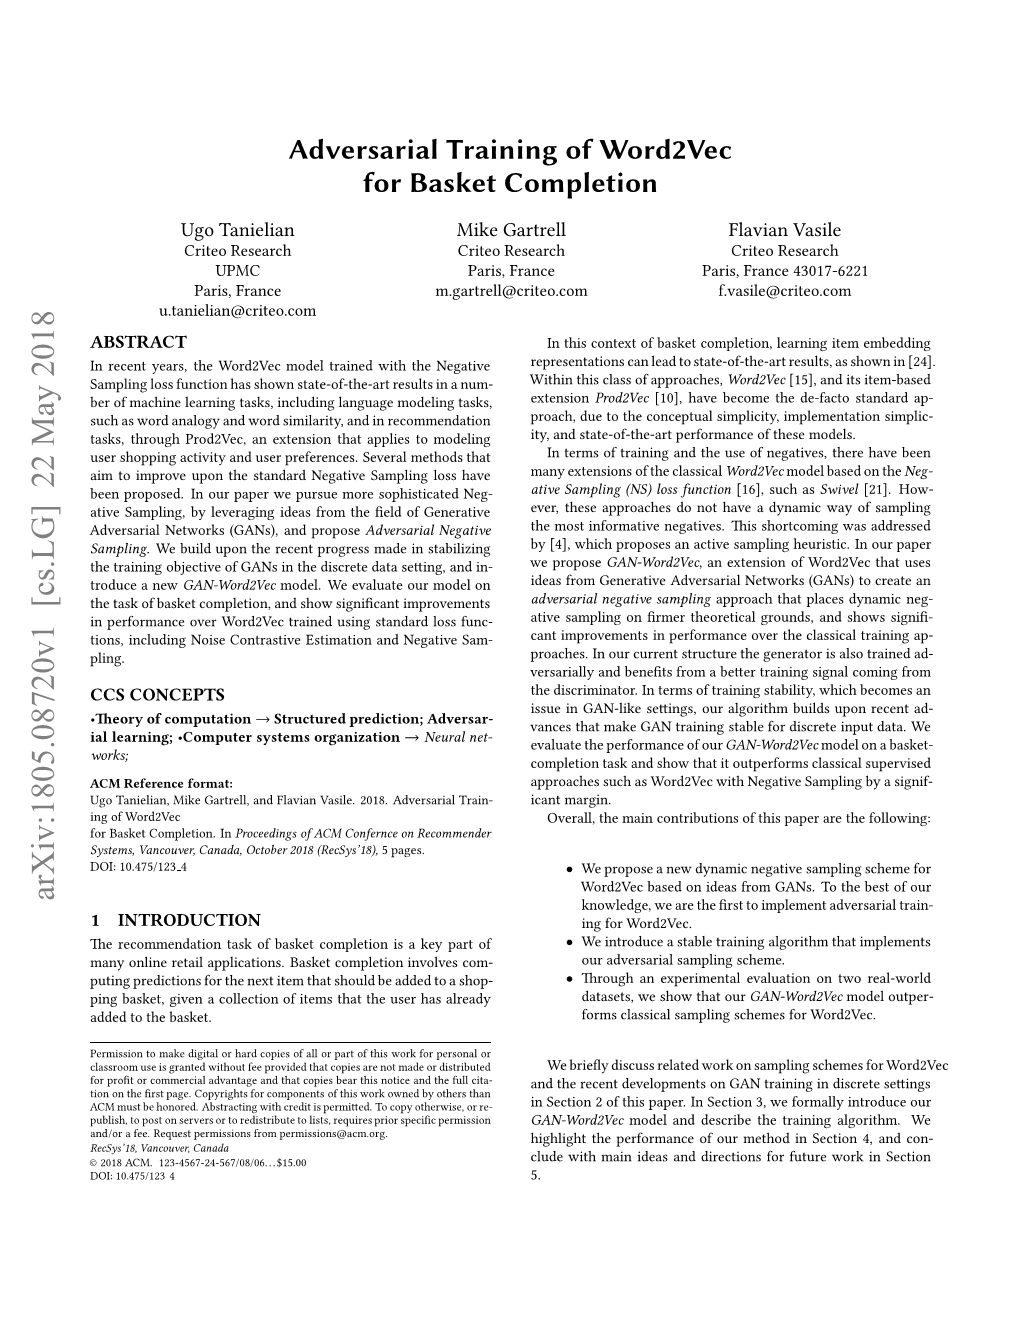 Adversarial Training of Word2vec for Basket Completion